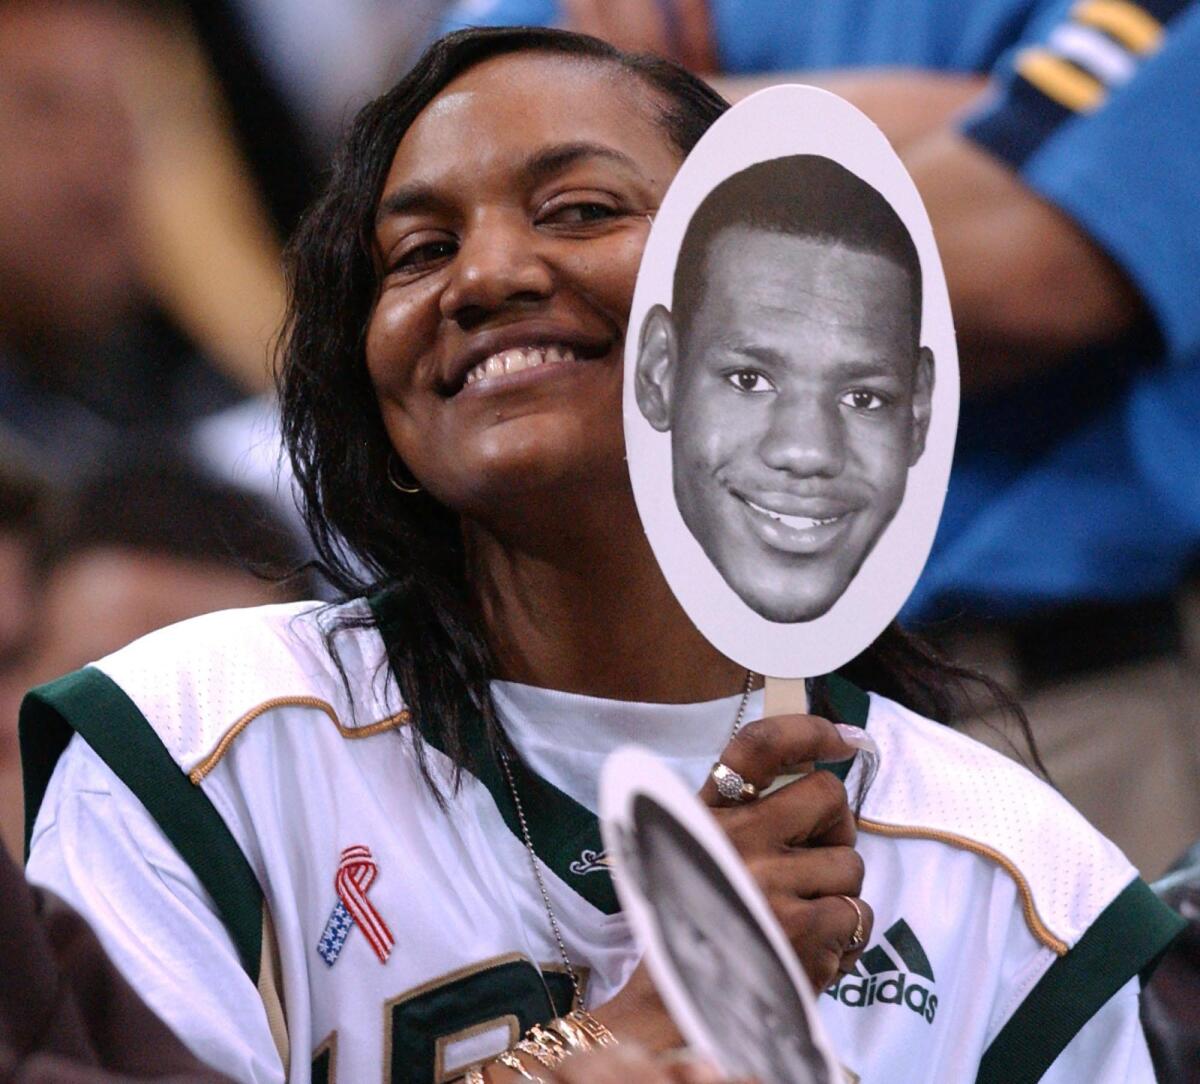 LeBron James' mother Gloria James, showing her support for James when he was still a high school player. His St. Vincent-St. Mary school was playing Southern California's Mater Dei on January 2003. St. Vincent-St. Mary won 64-58 with James scoring 21 points.